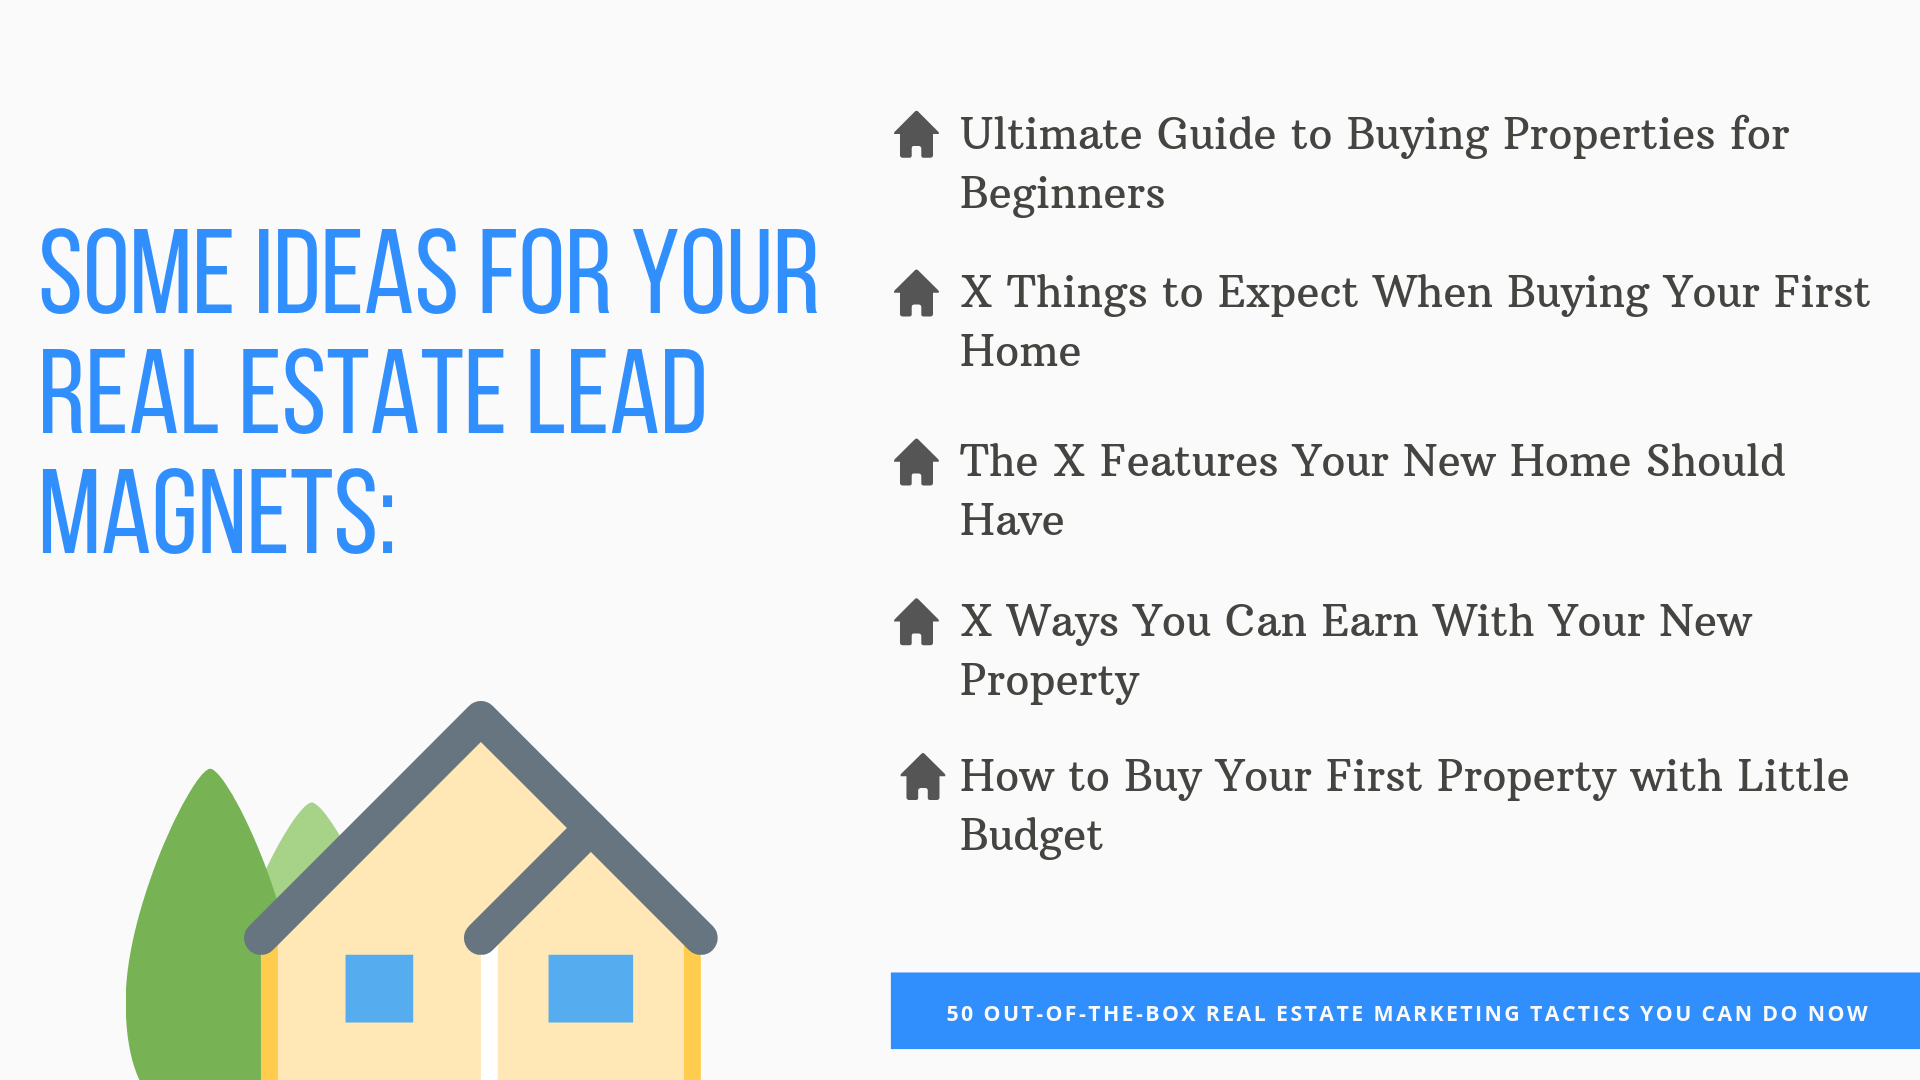 https://www.jasonfox.me/wp-content/uploads/2019/04/SOME-IDEAS-FOR-YOUR-REAL-ESTATE-LEAD-MAGNETS.png